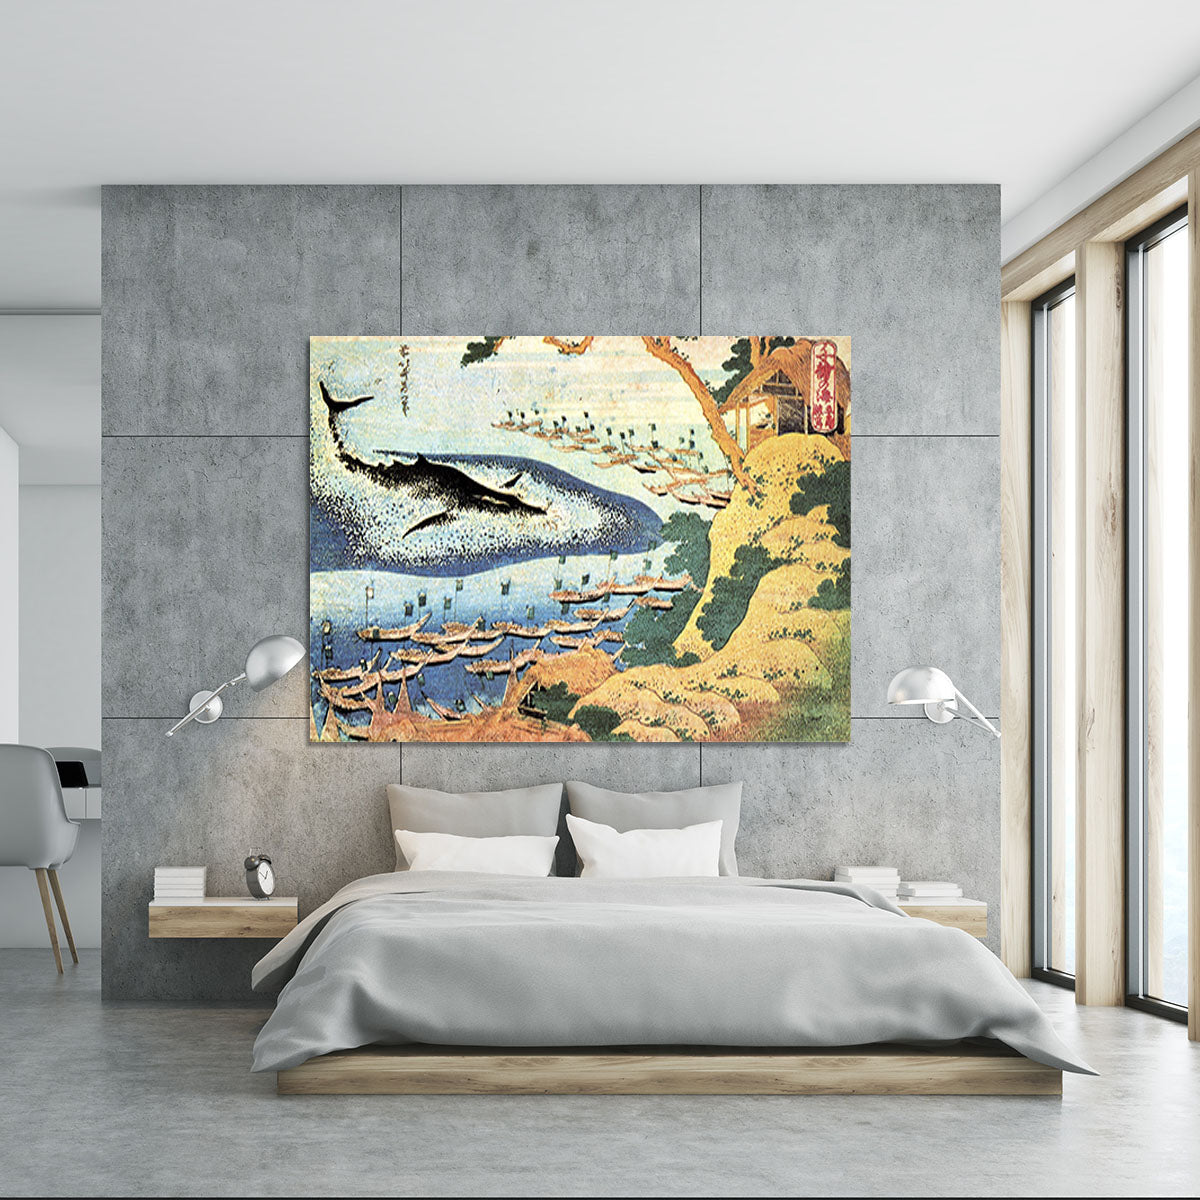 Ocean landscape and whale by Hokusai Canvas Print or Poster - Canvas Art Rocks - 5